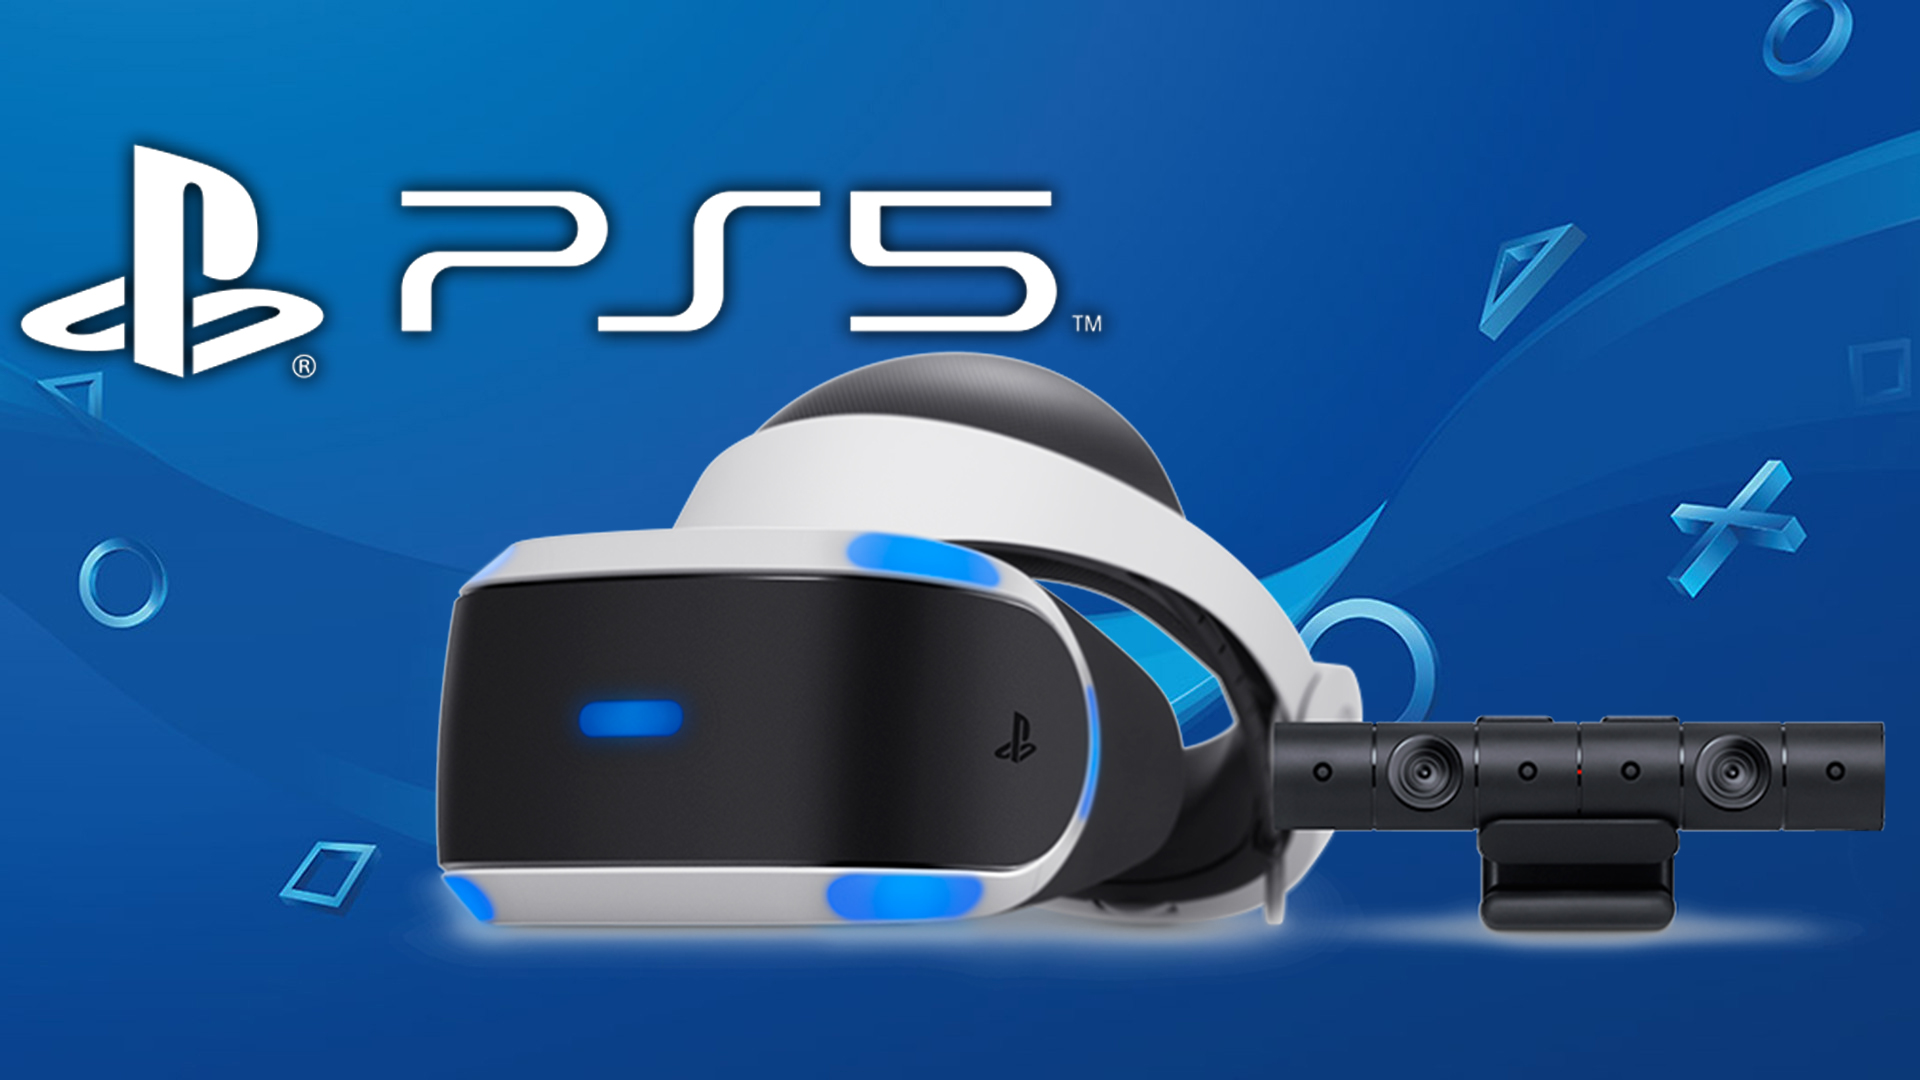 vr compatible with ps4